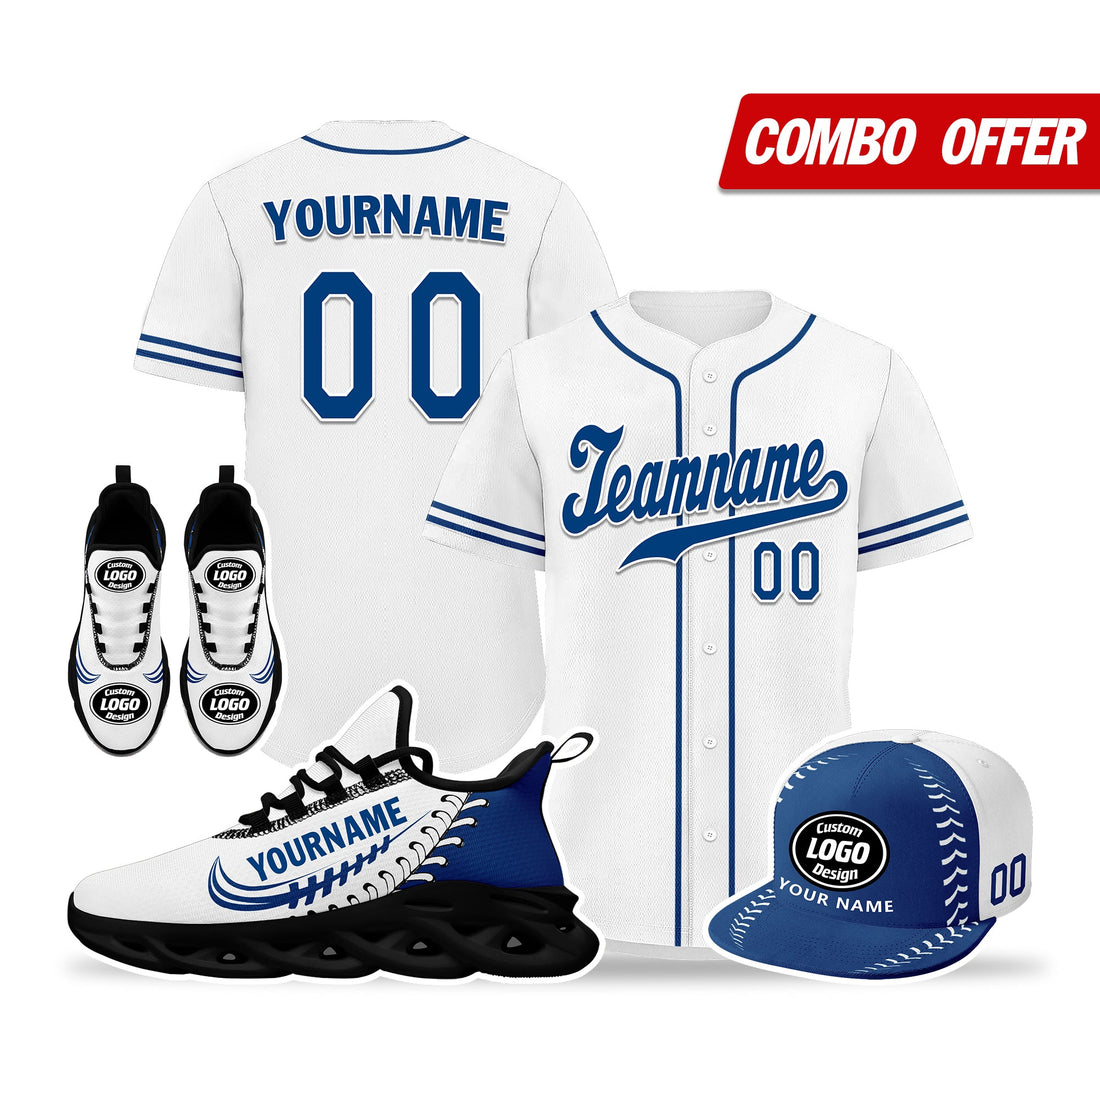 Custom White Jersey MaxSoul Shoes and Hat Combo Offer Personalized ZH-bd0b00e0-ab